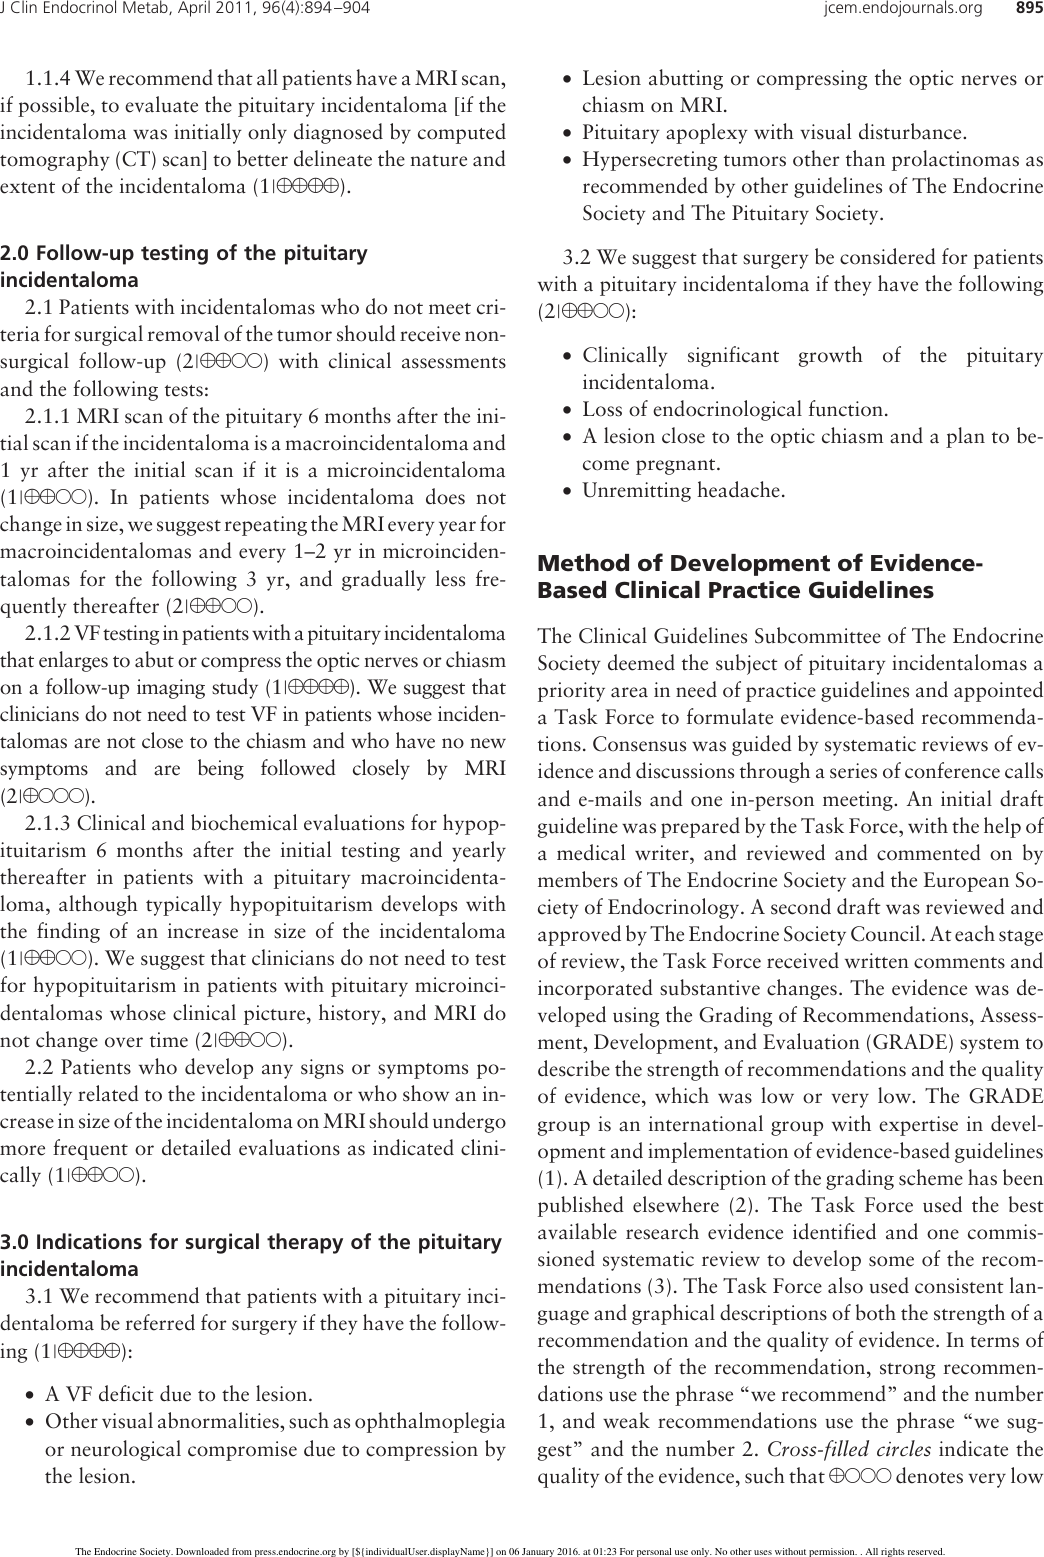 Page 2 of 11 - Pituitary Incidentaloma: An Endocrine Society Clinical Practice Guideline Incidentaloma Guide 2011